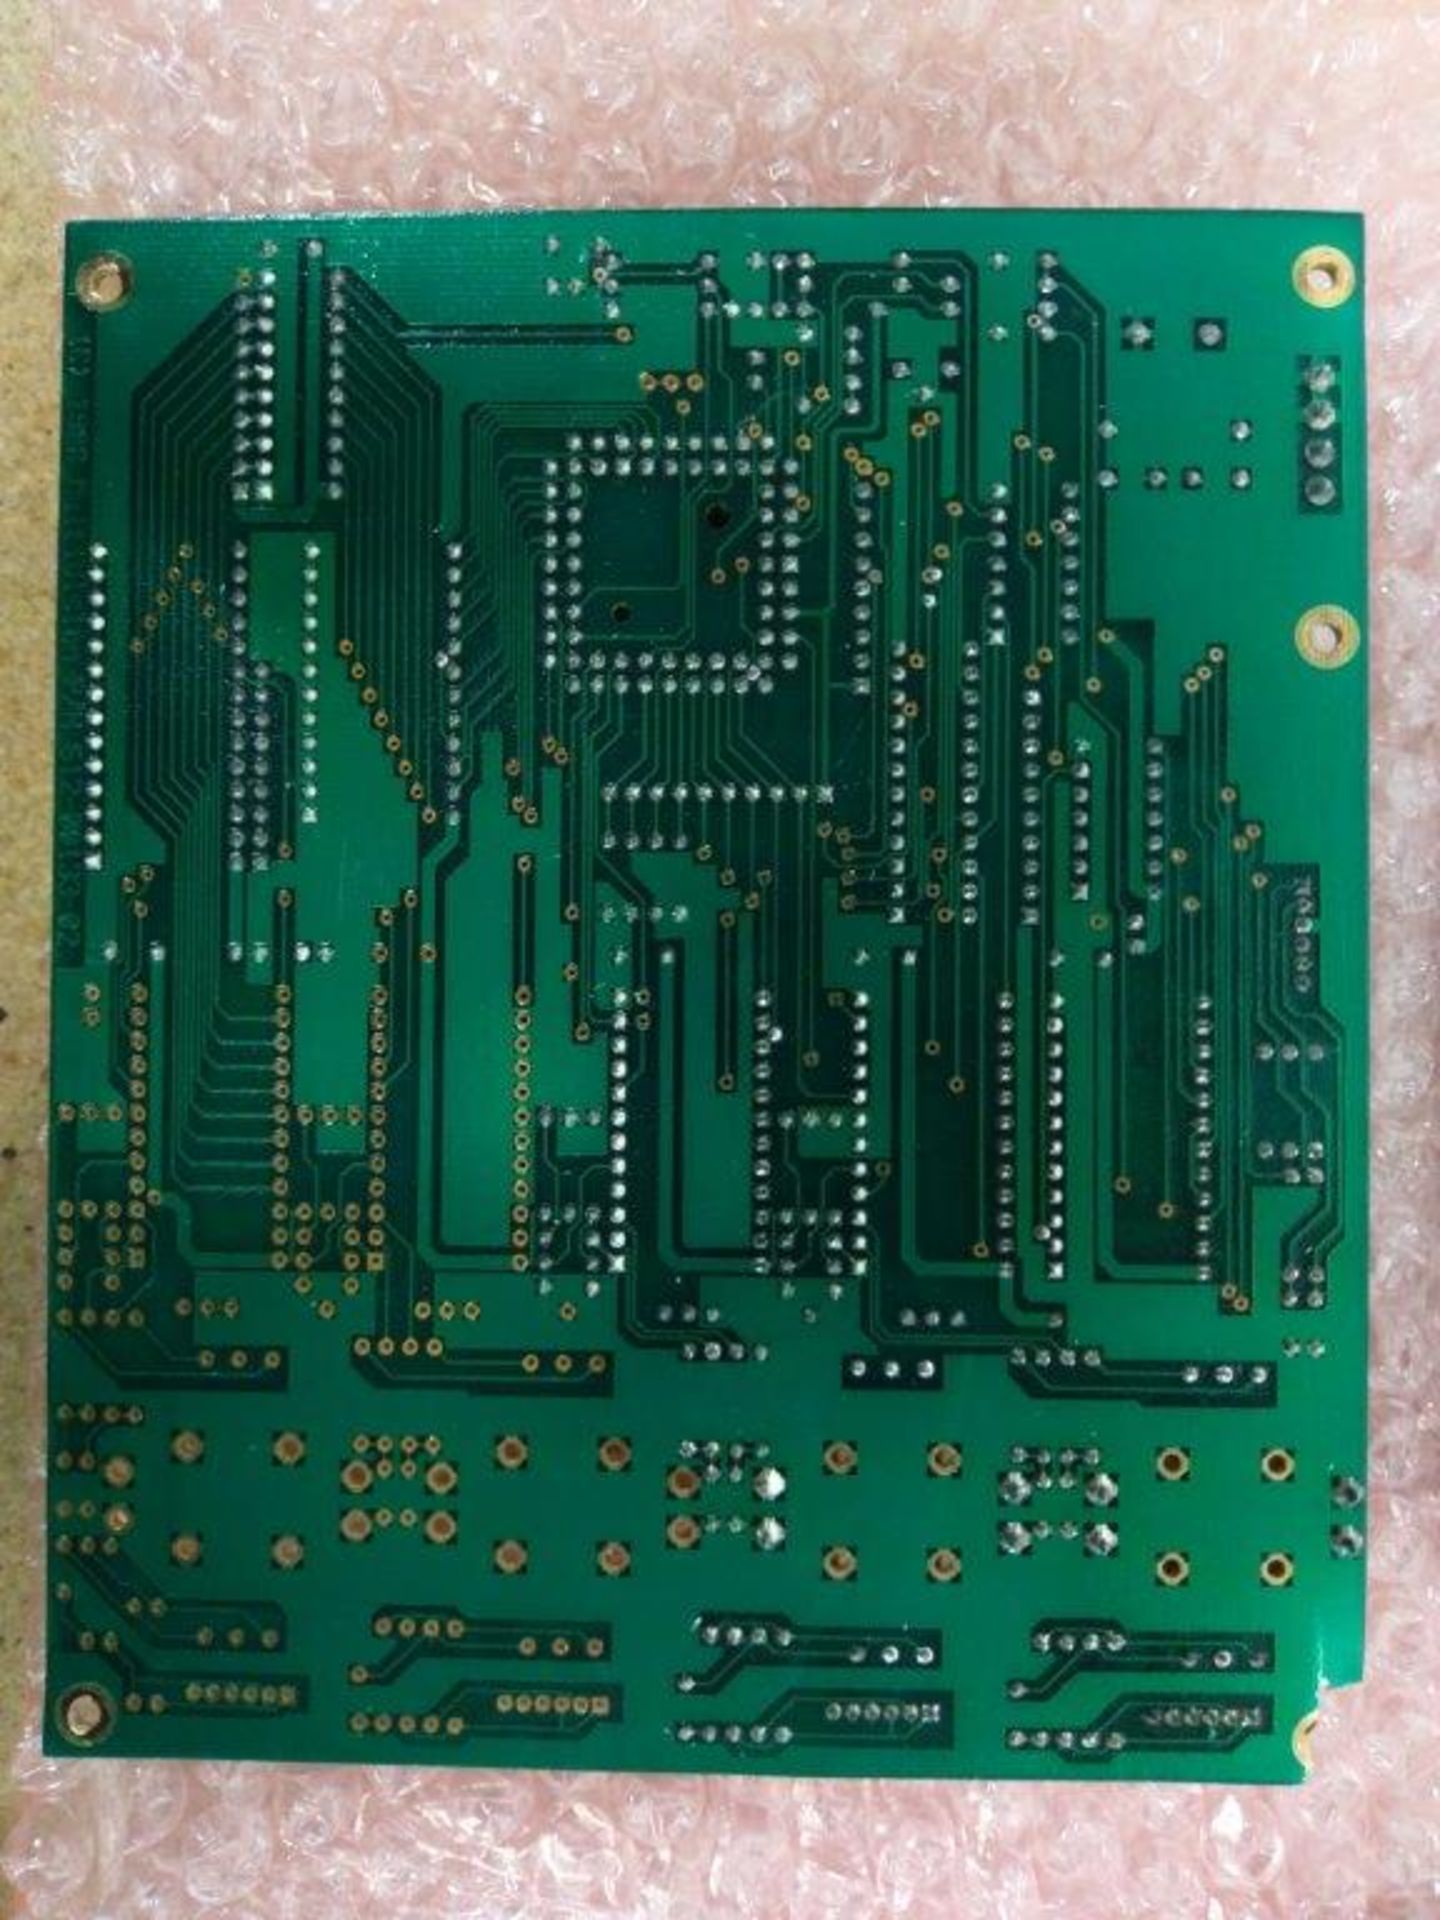 Lot of 4 Industrial Circuit Boards - Monarch Cortland, Bitrode and more - Image 8 of 9